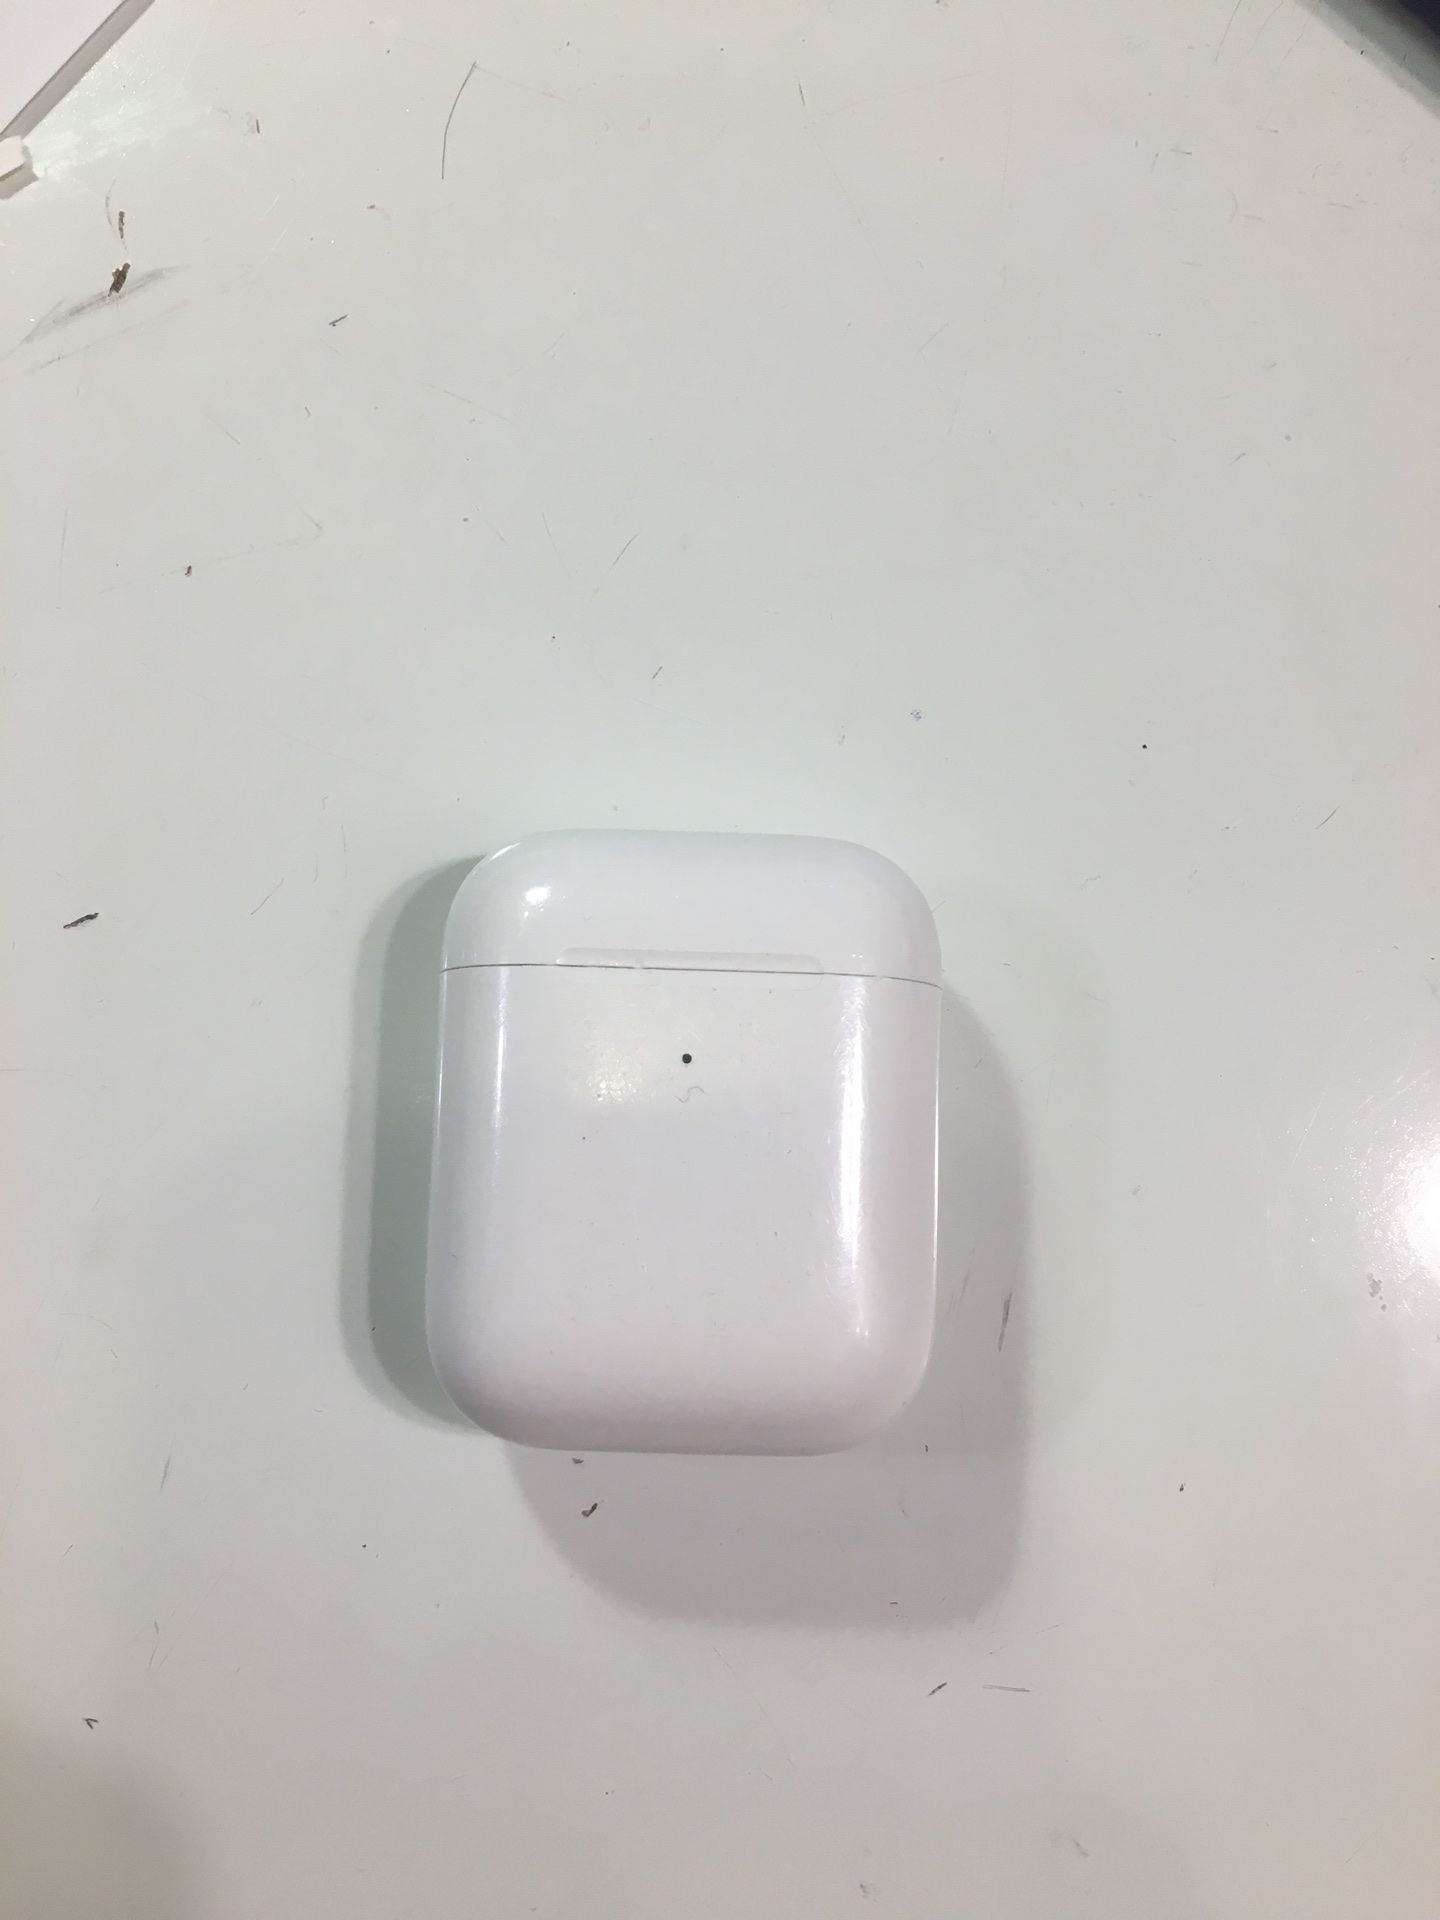 Free airpods!